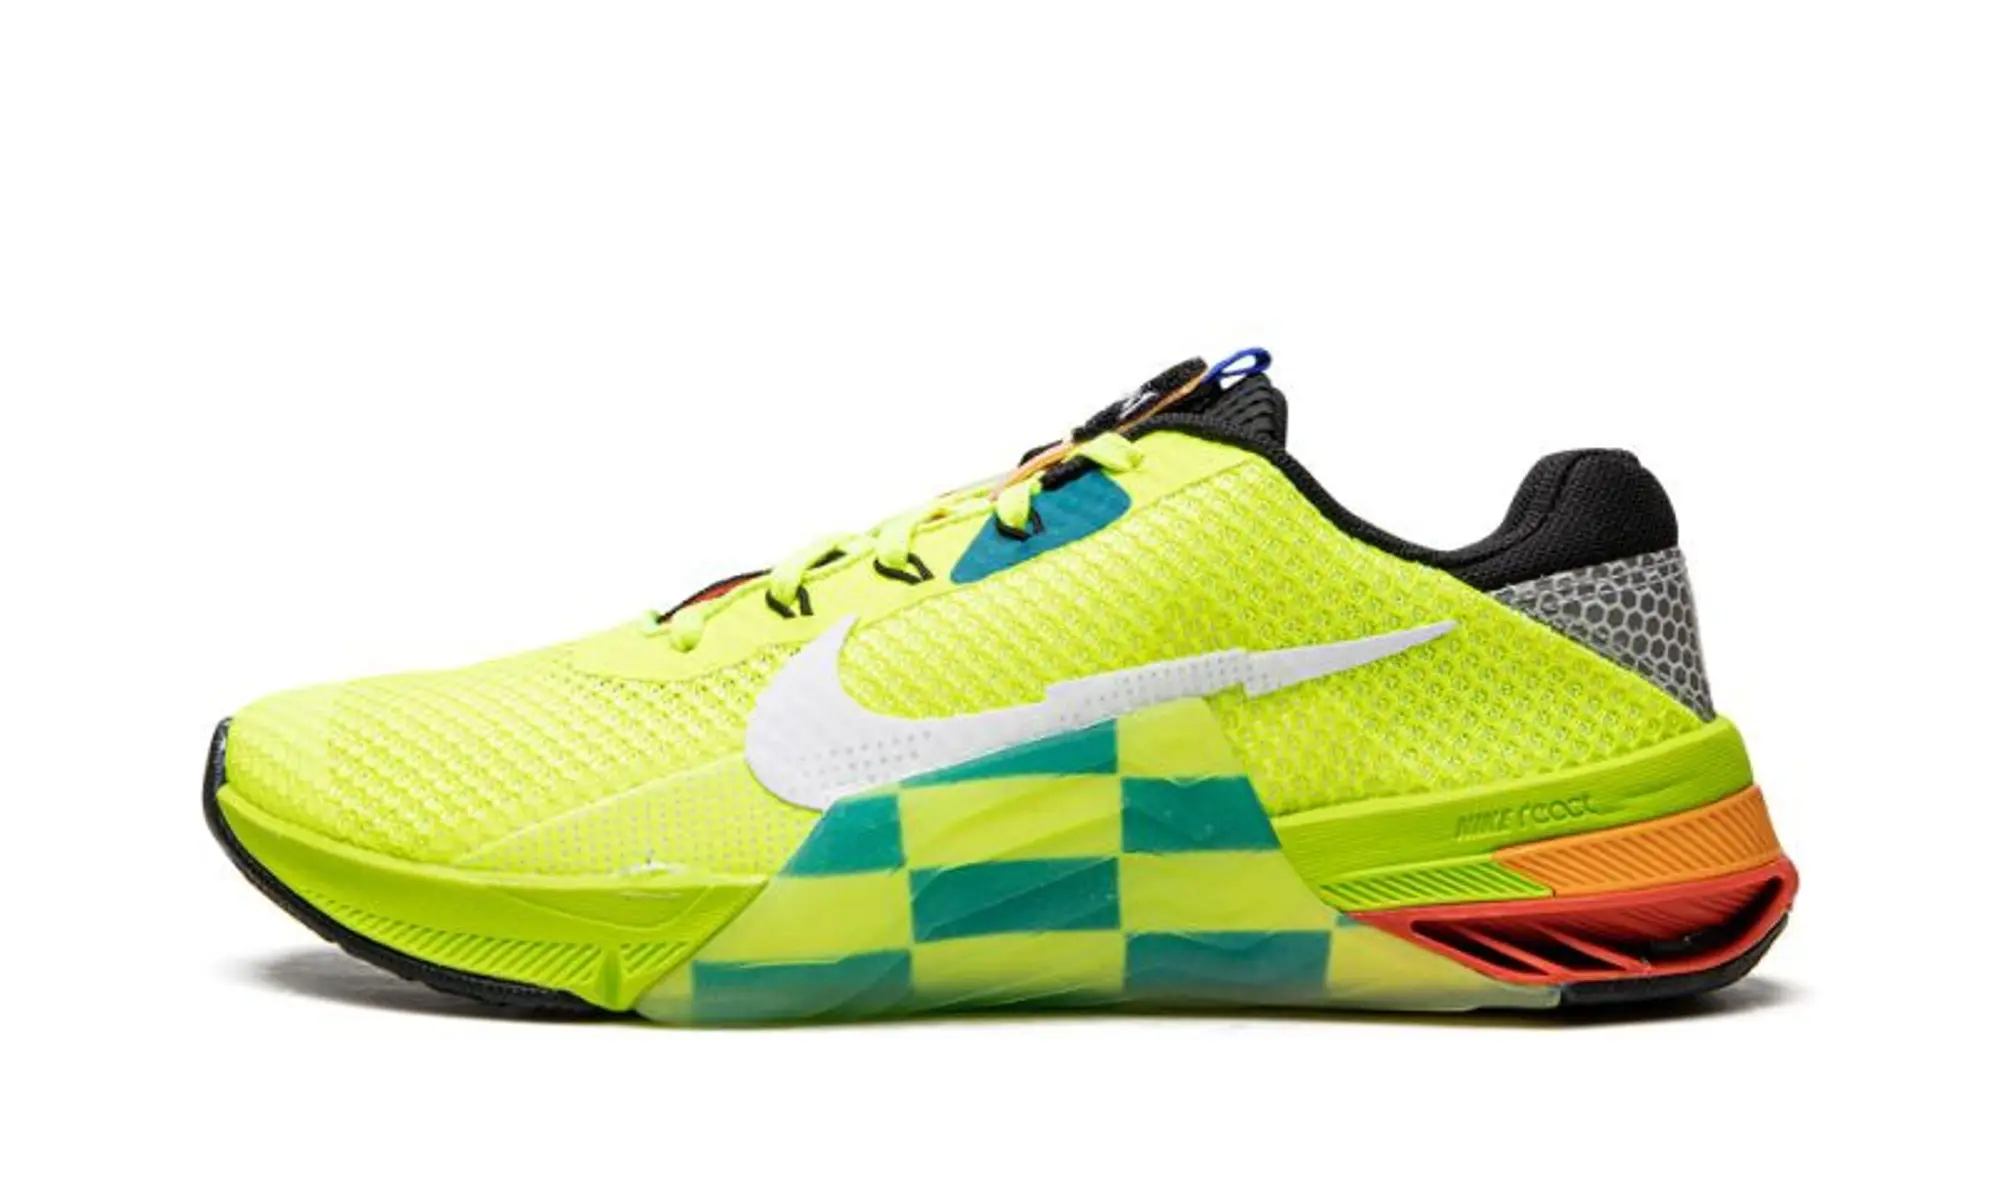 Nike Metcon 7 AMP Shoes